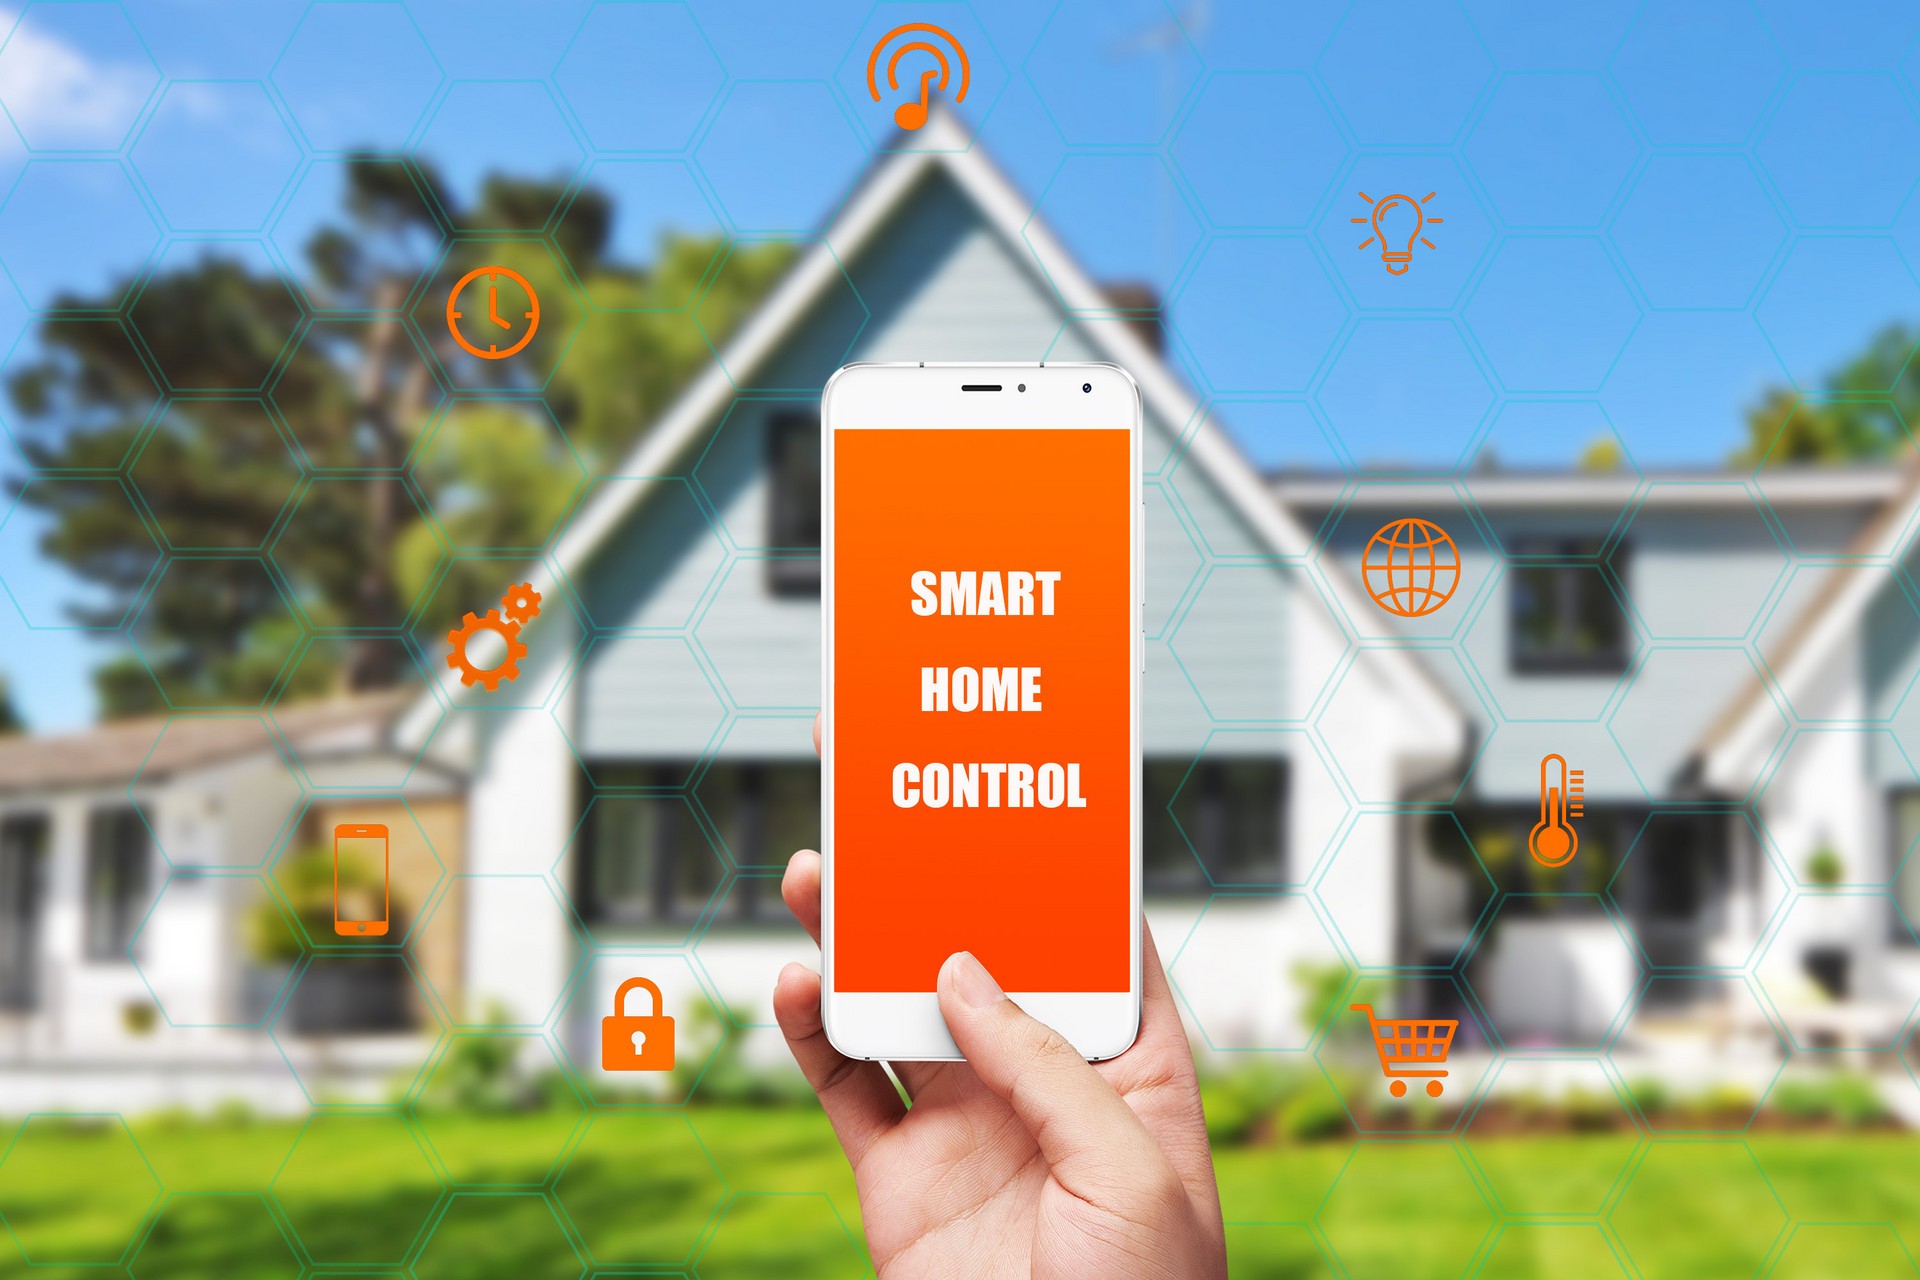 Real stuff   sharing | Smart home and smart furniture, what is the difference between the two?